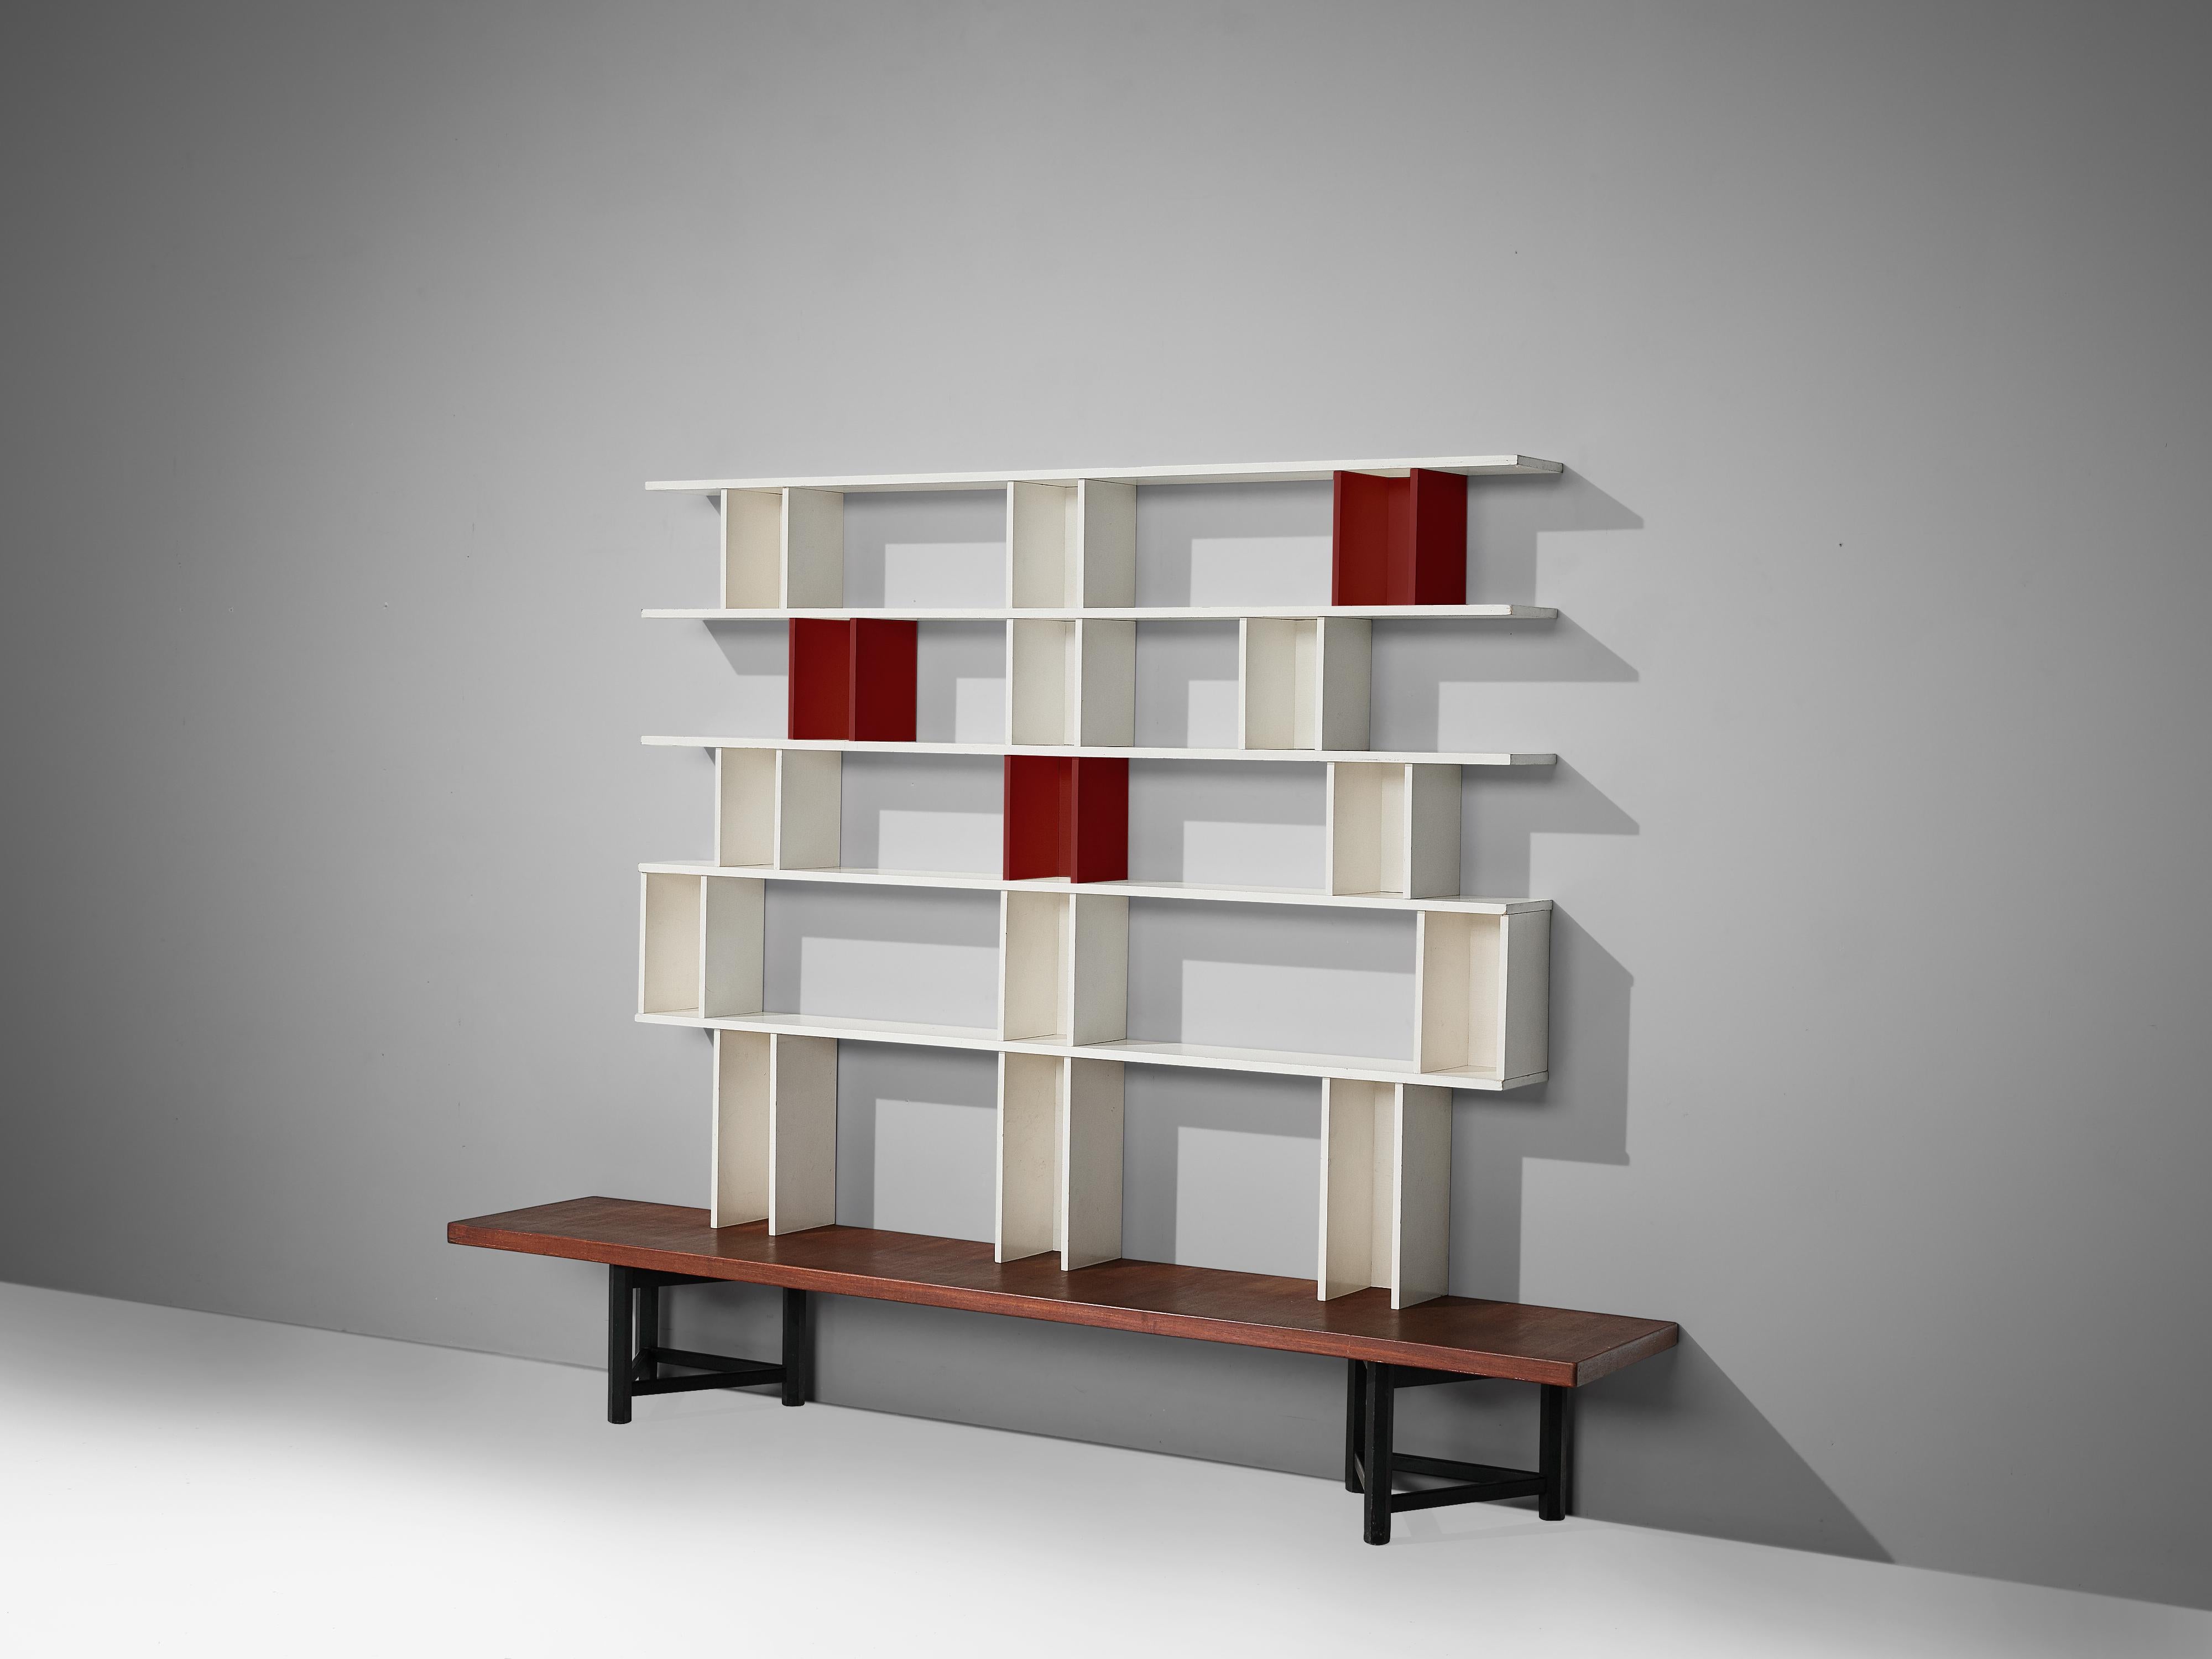 Carl Gustaf Hiort af Ornäs for Huonekalu Mikko Nupponen, 'Välipala' bookcase, teak, wood, Finland, 1950s.

This bookcase is designed by the Finnish designer Carl Gustaf Hiort. The bookcase is built of several wooden elements in different colors,